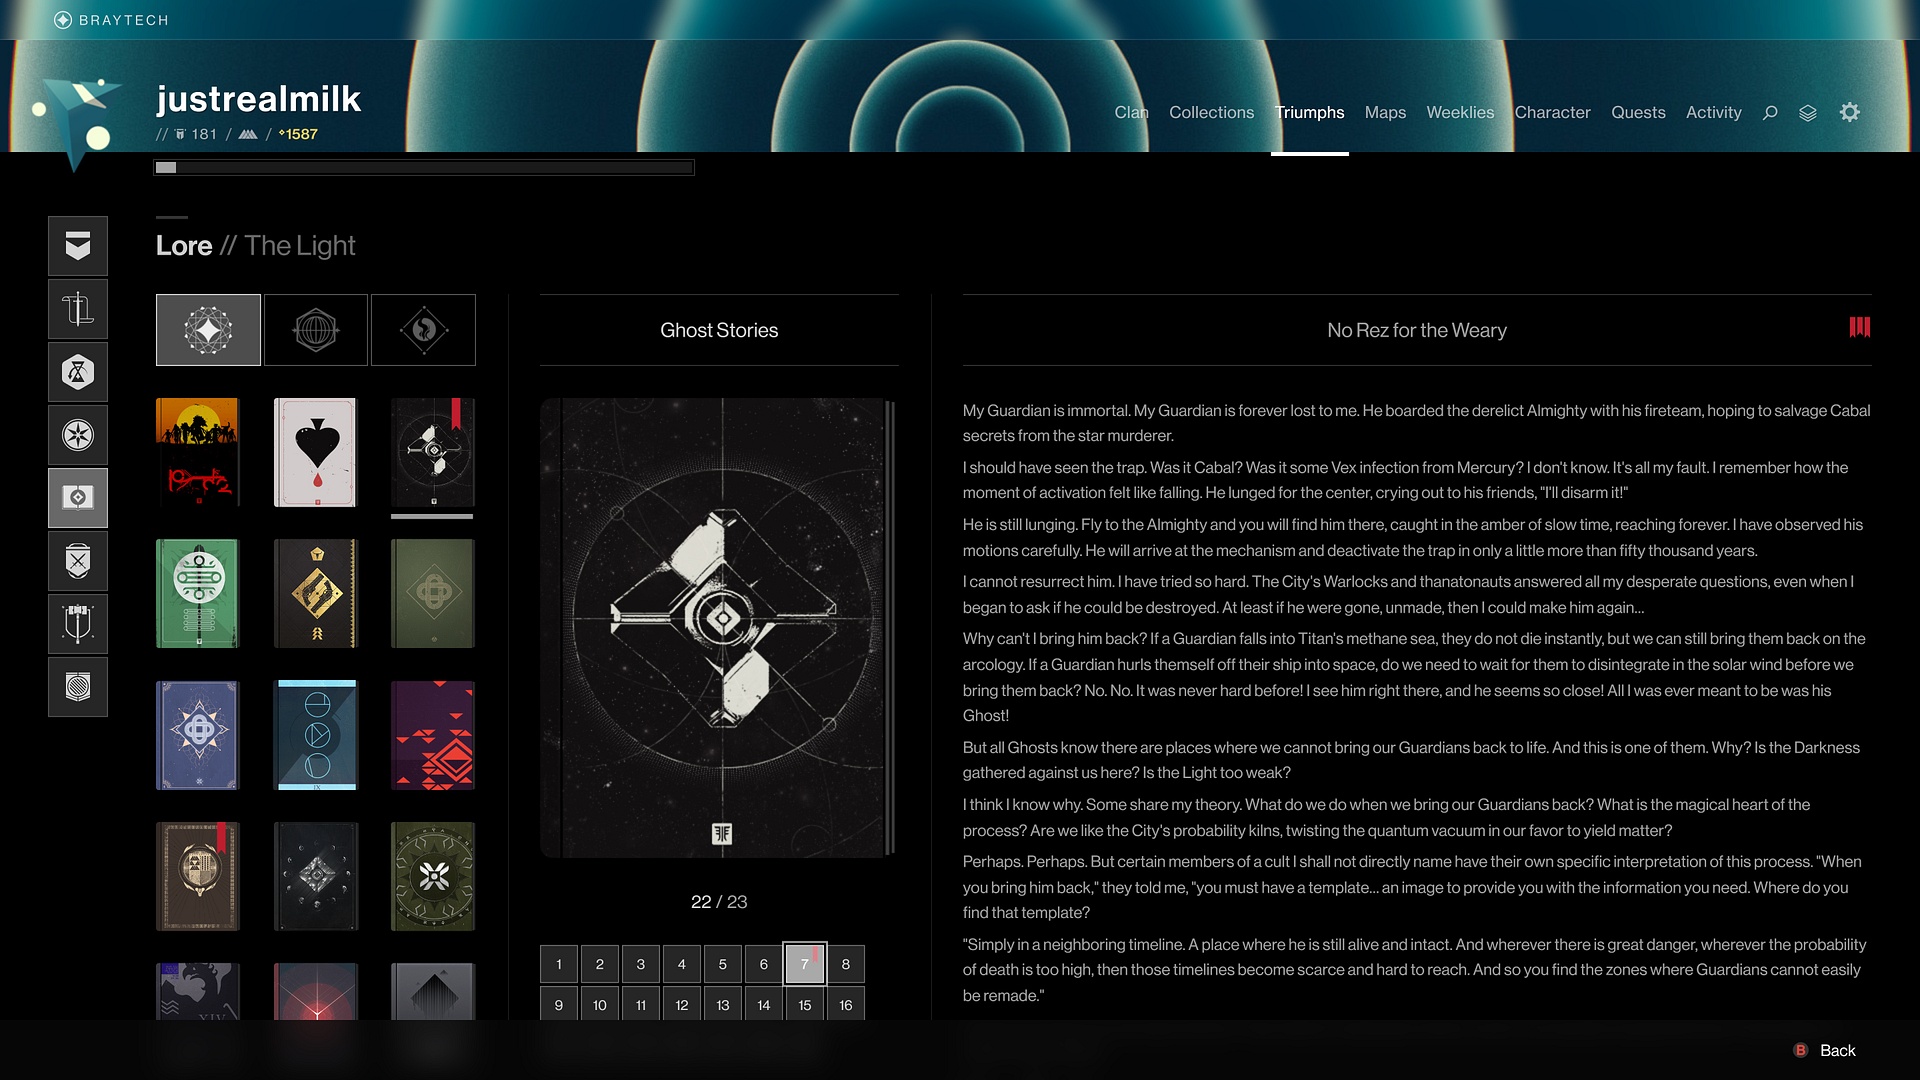 Screenshot of a _Triumphs_ view presentation node for "Lore." In Destiny, "Lore" is a primary delivery method for storytelling. Braytech provides a pleasant reading experience and the ability to bookmark pages.